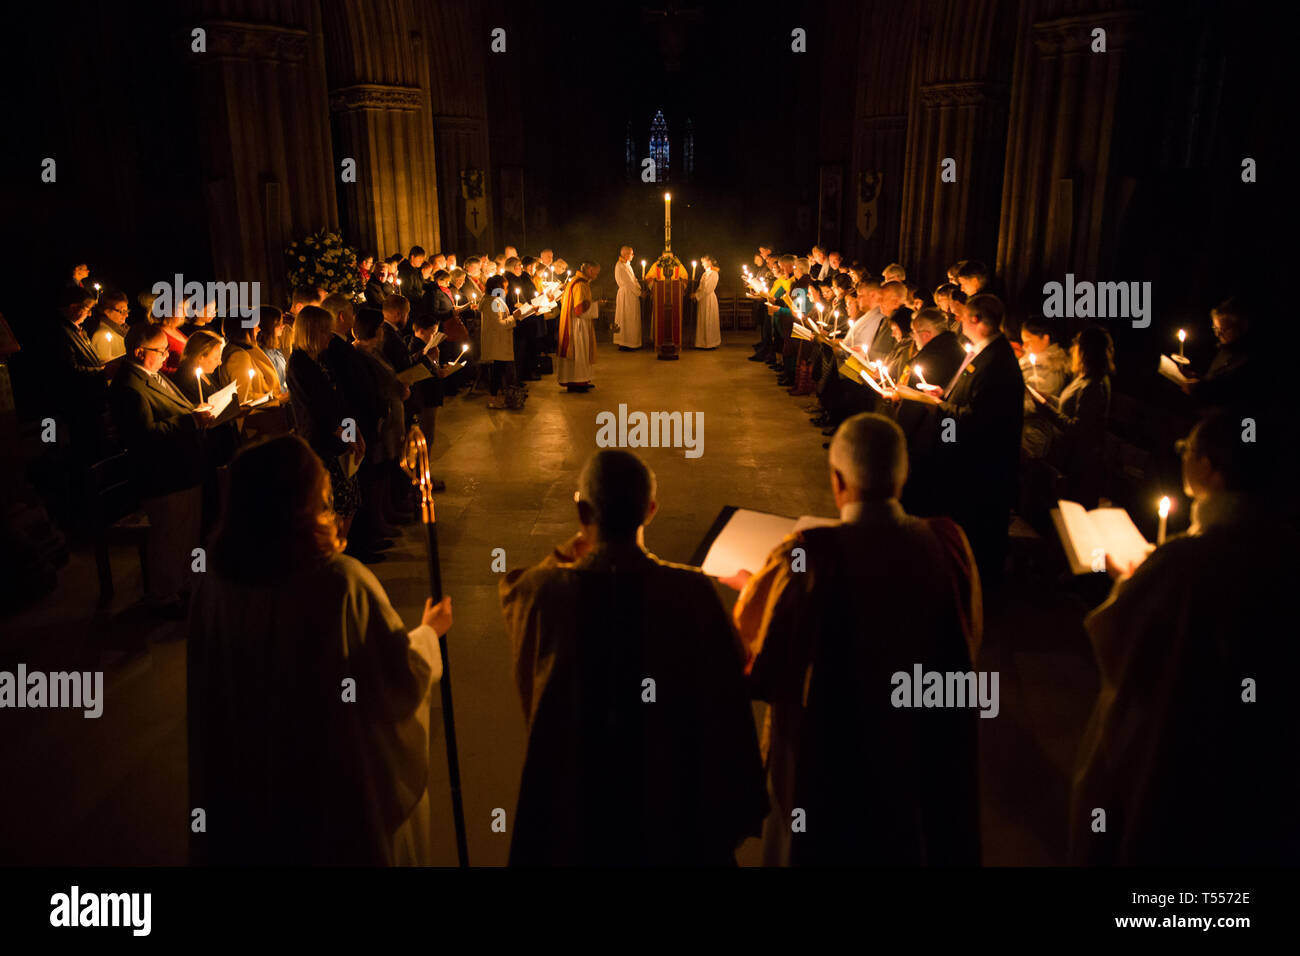 The candlelit Easter Vigil and Holy Eucharist at Lichfield Cathedral, a 5am service on Easter Sunday to mark the Christian belief in the resurrection of Christ as described in the New Testament of the Bible. Stock Photo